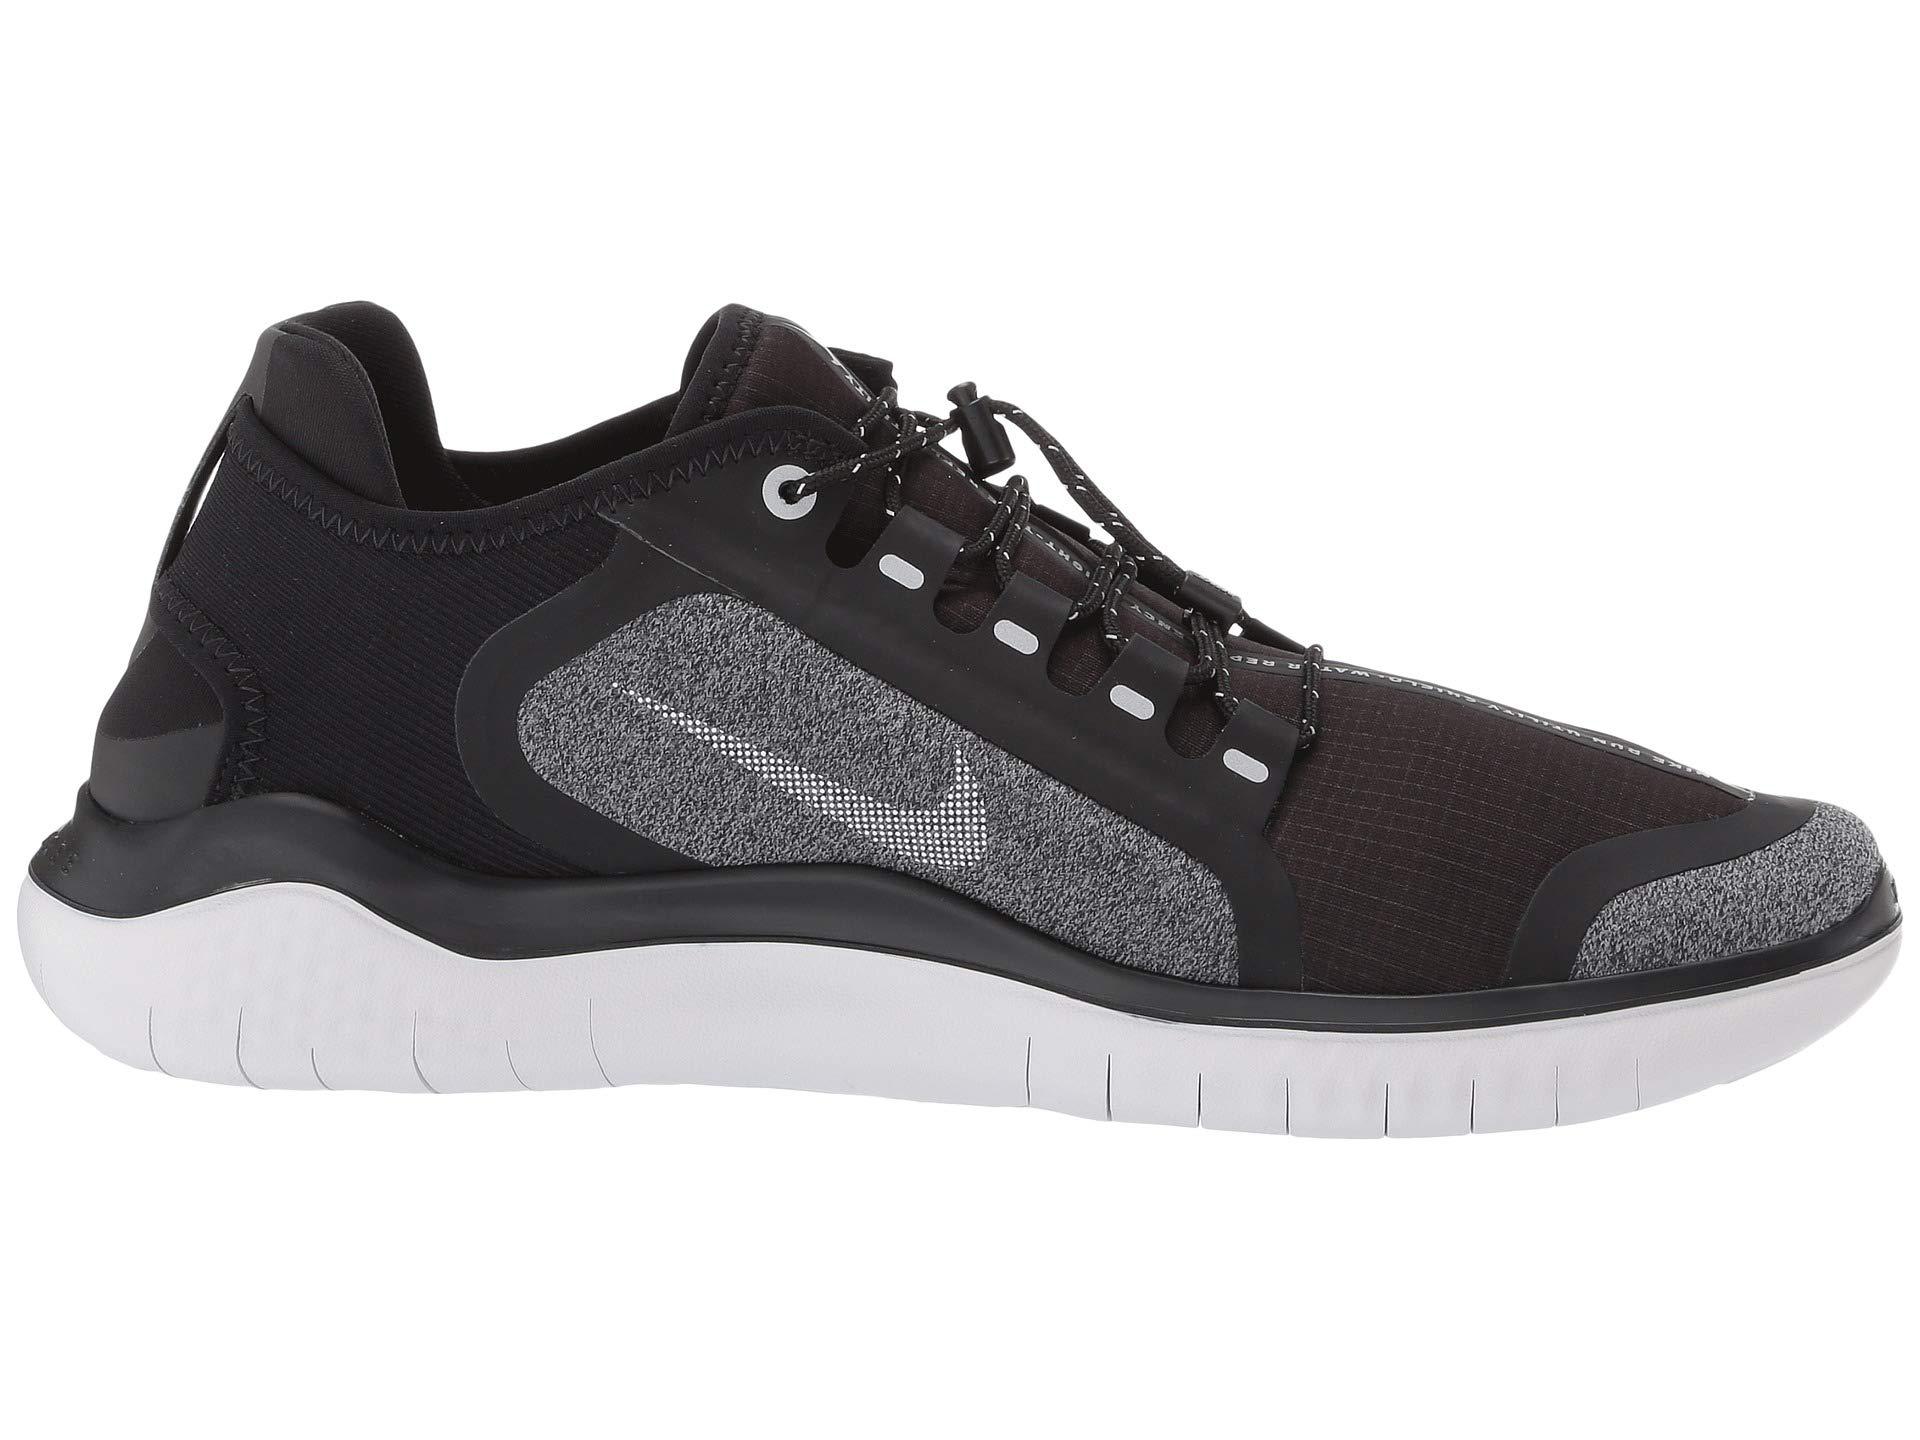 Nike Synthetic Free Rn 2018 Shield Training Shoes in Black/Metallic  Silver/Cool Grey (Black) for Men - Lyst